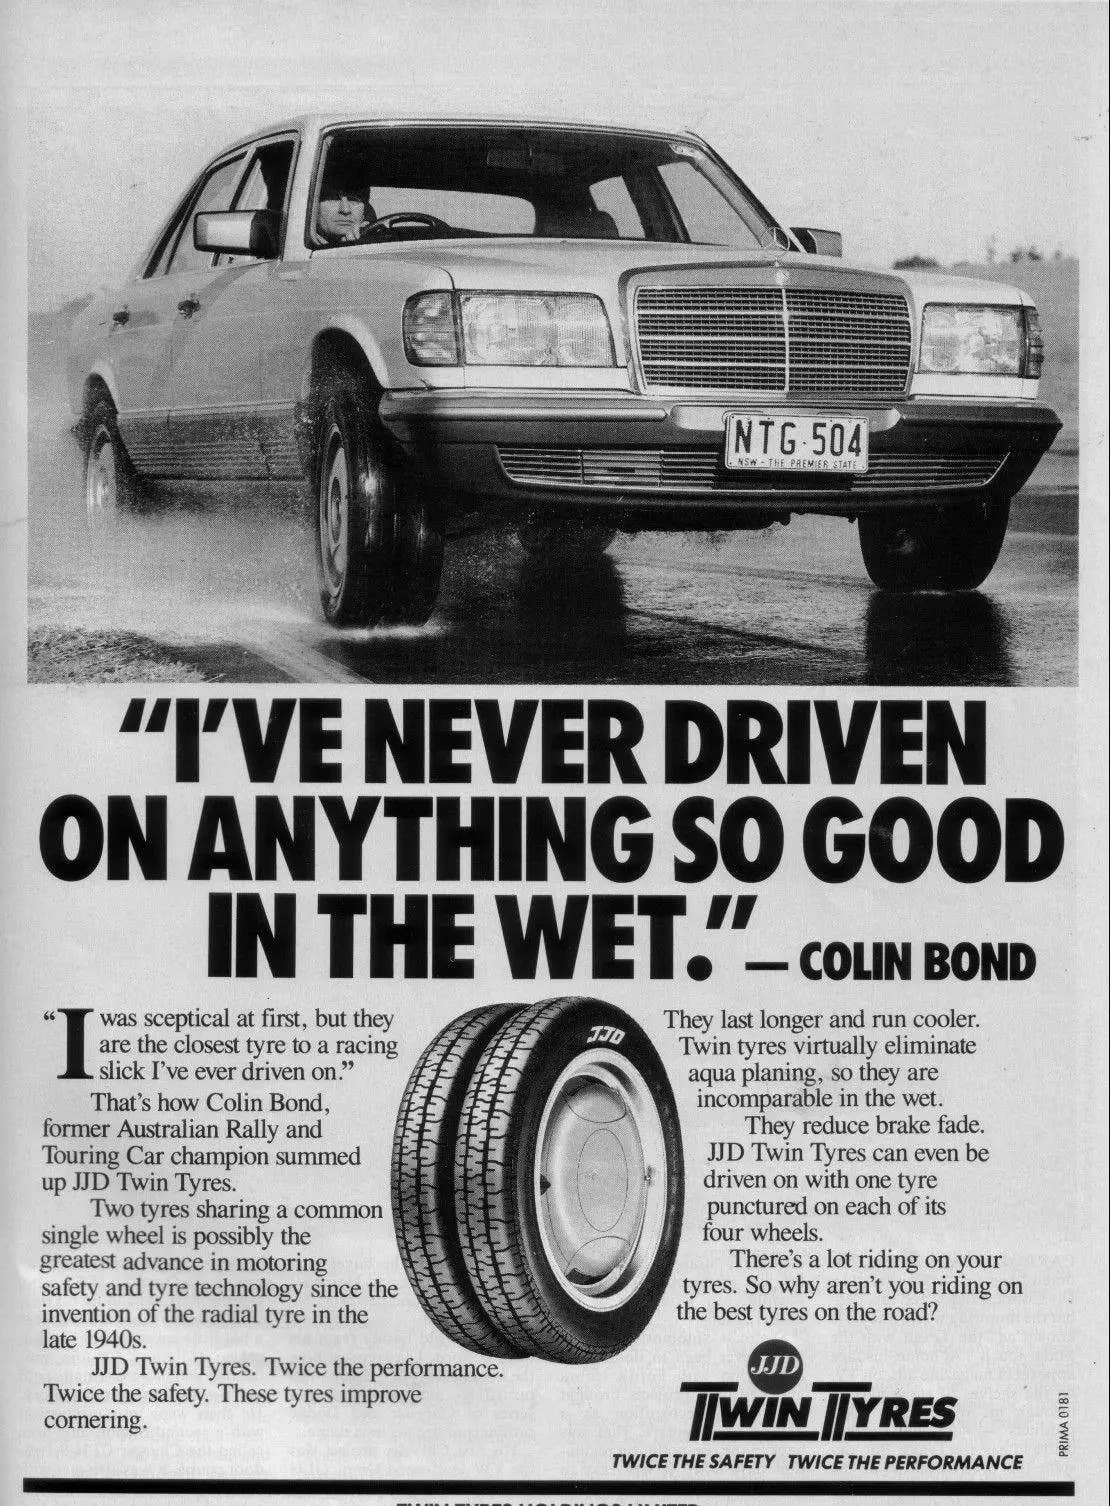 JJD Twin Tire ad from Australia, with spelling as &quot;tyres&quot;